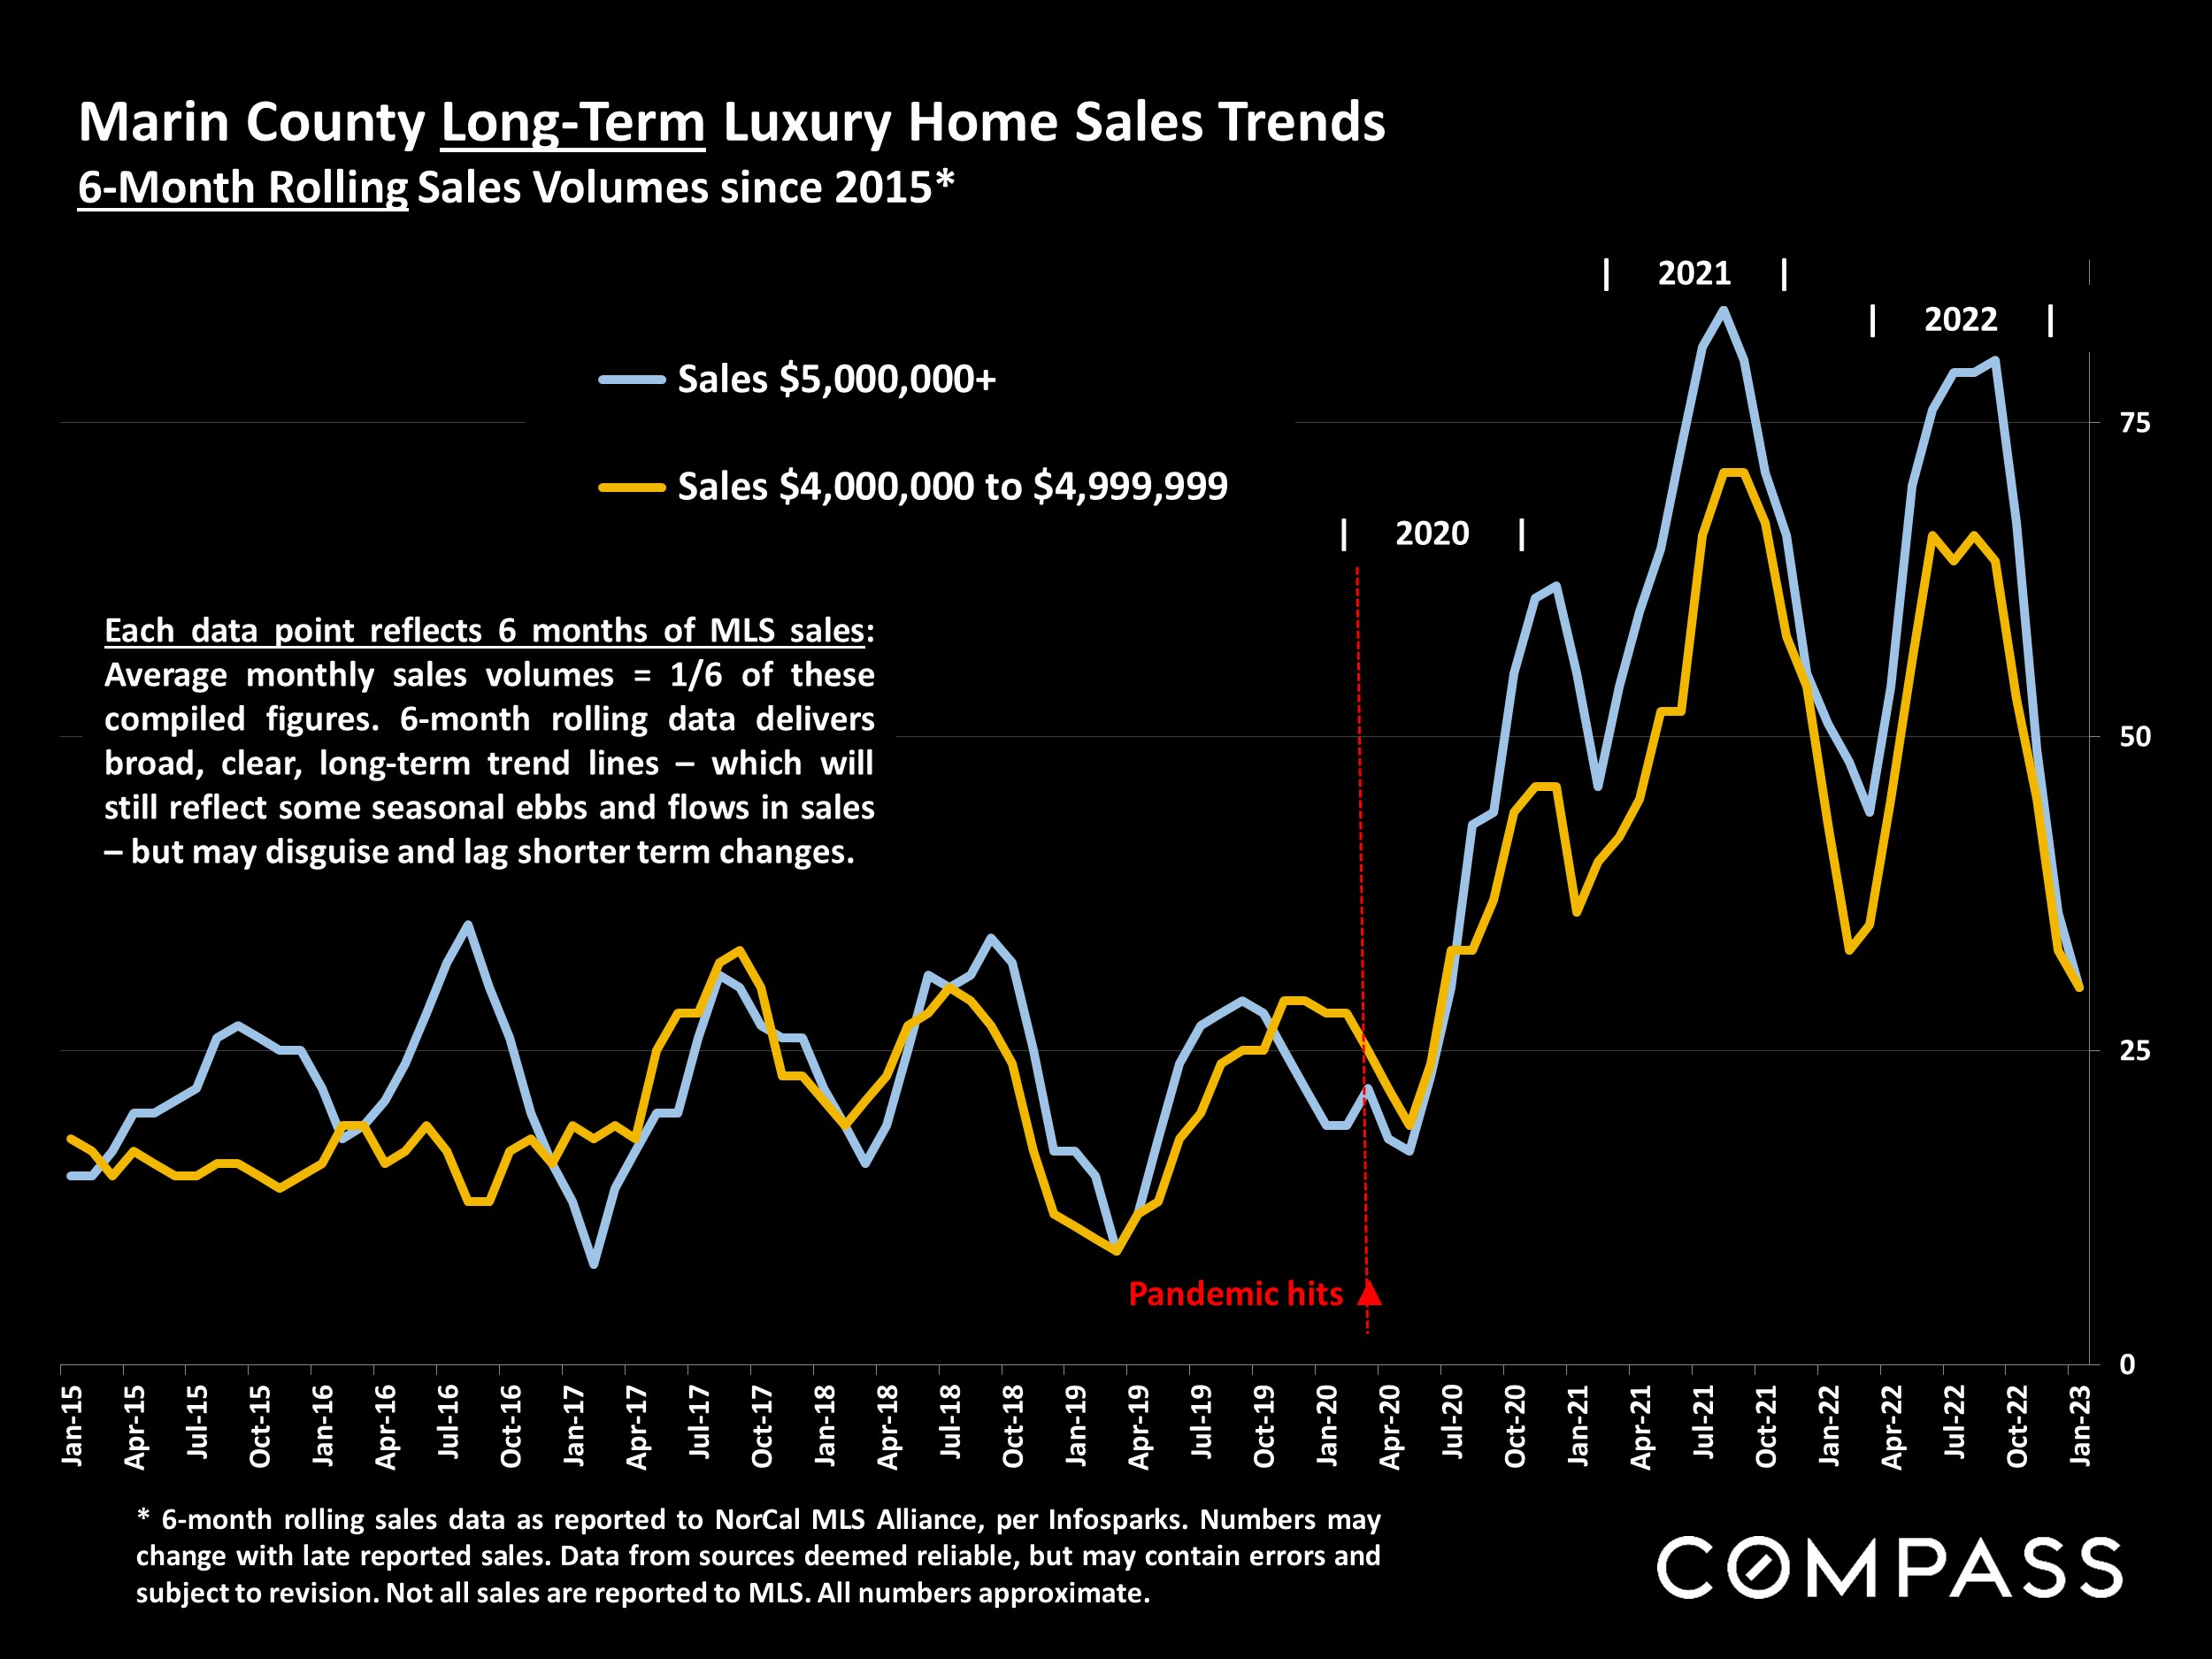 Marin County Long-Term Luxury Home Sales Trends